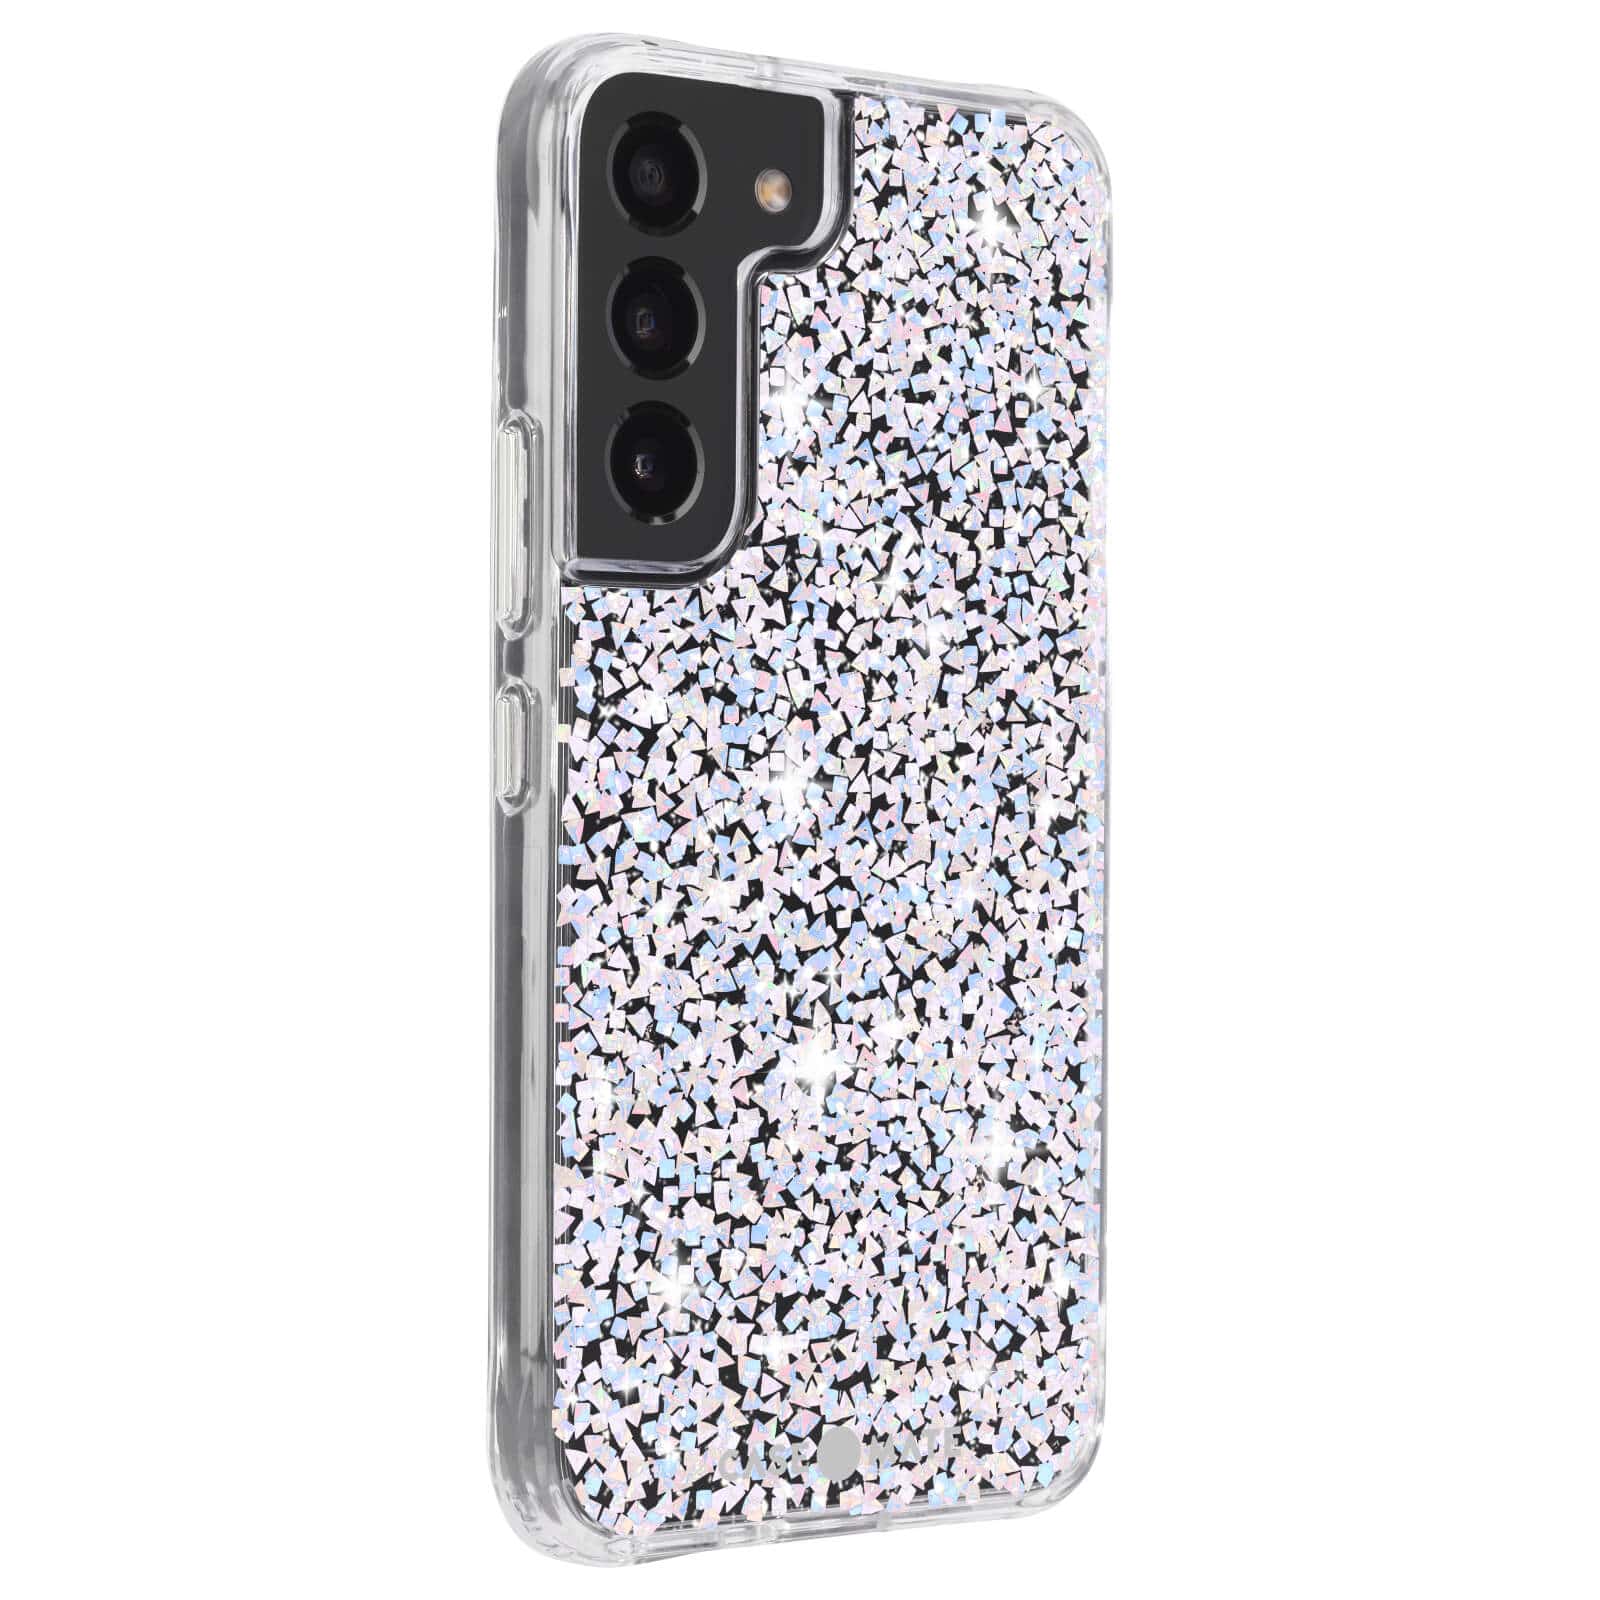 Case-Mate Twinkle Case for Samsung Galaxy S22 Ultra - Diamond